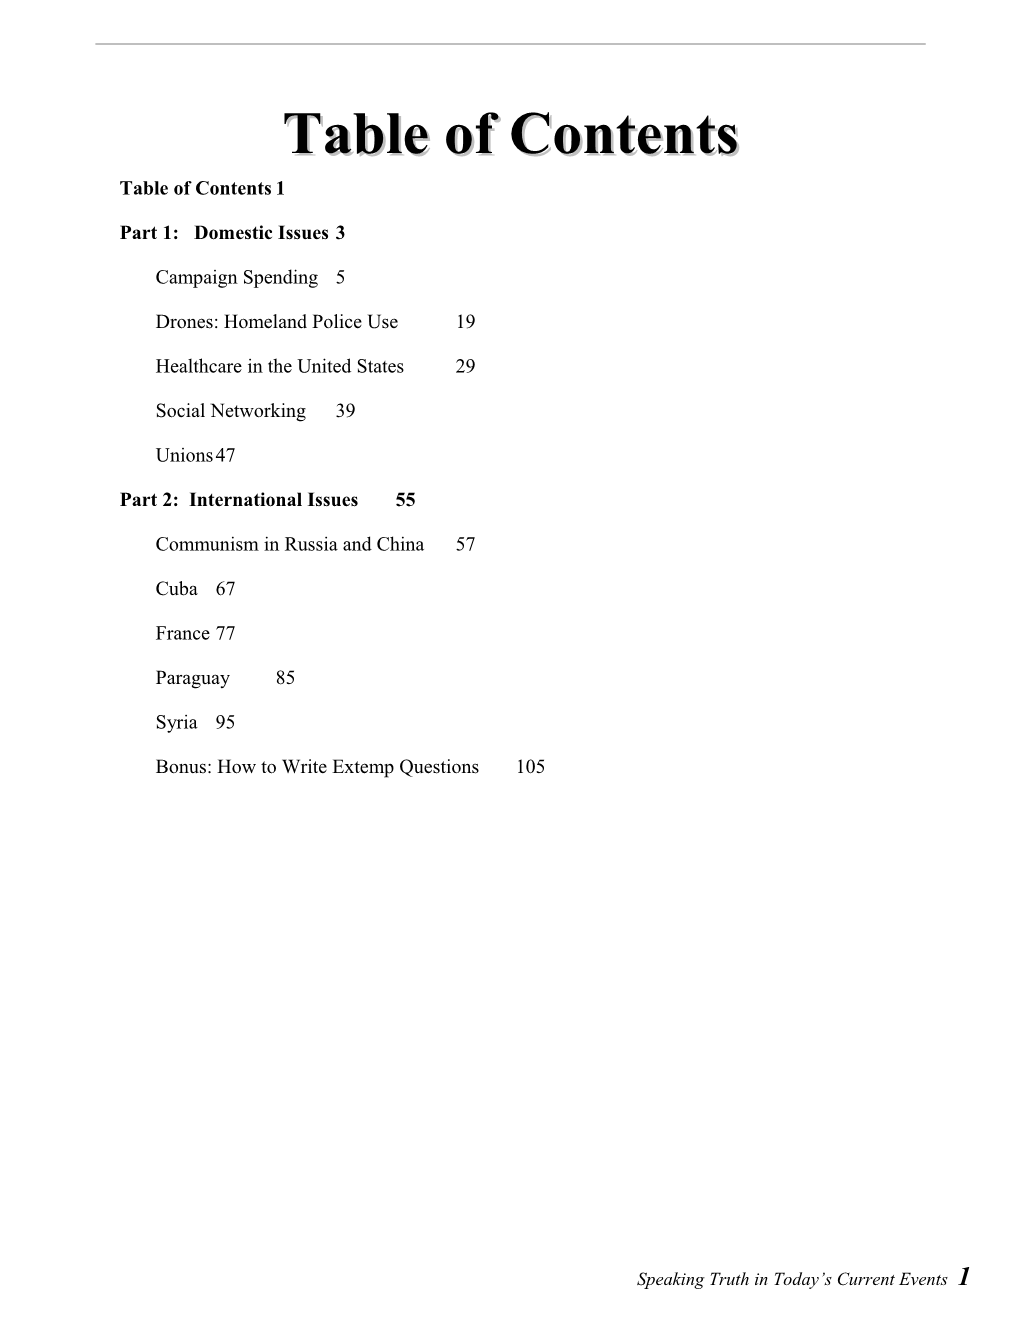 Table of Contents s16